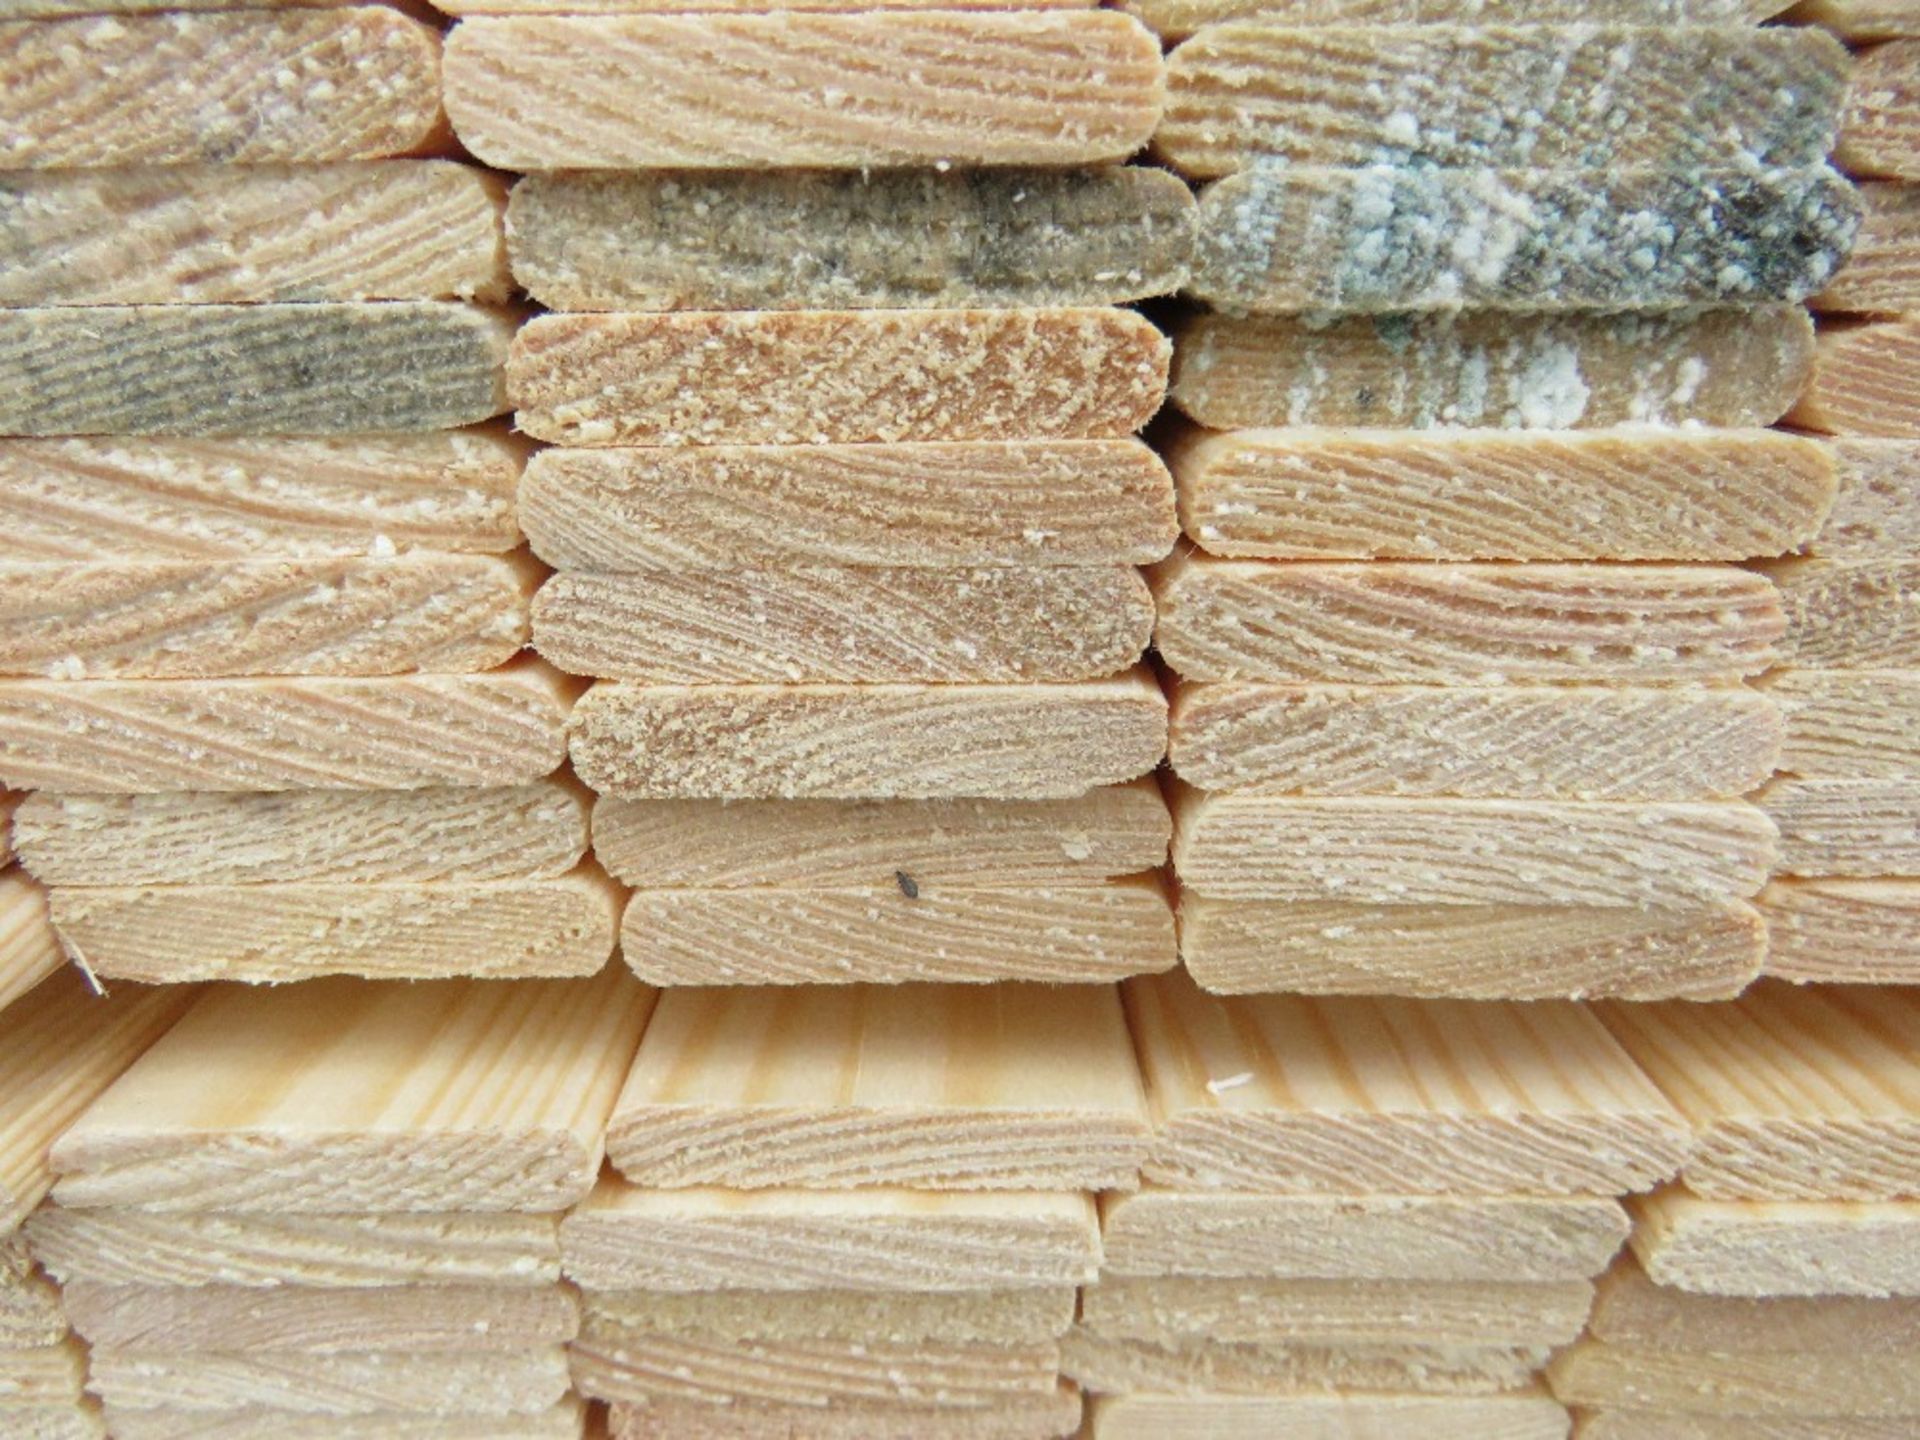 EXTRA LARGE PACK OF UNTREATED THIN WOVEN FENCE CLADDING SLATS, 1.74M LENGTH X 40MM WIDTH APPROX. - Image 3 of 3